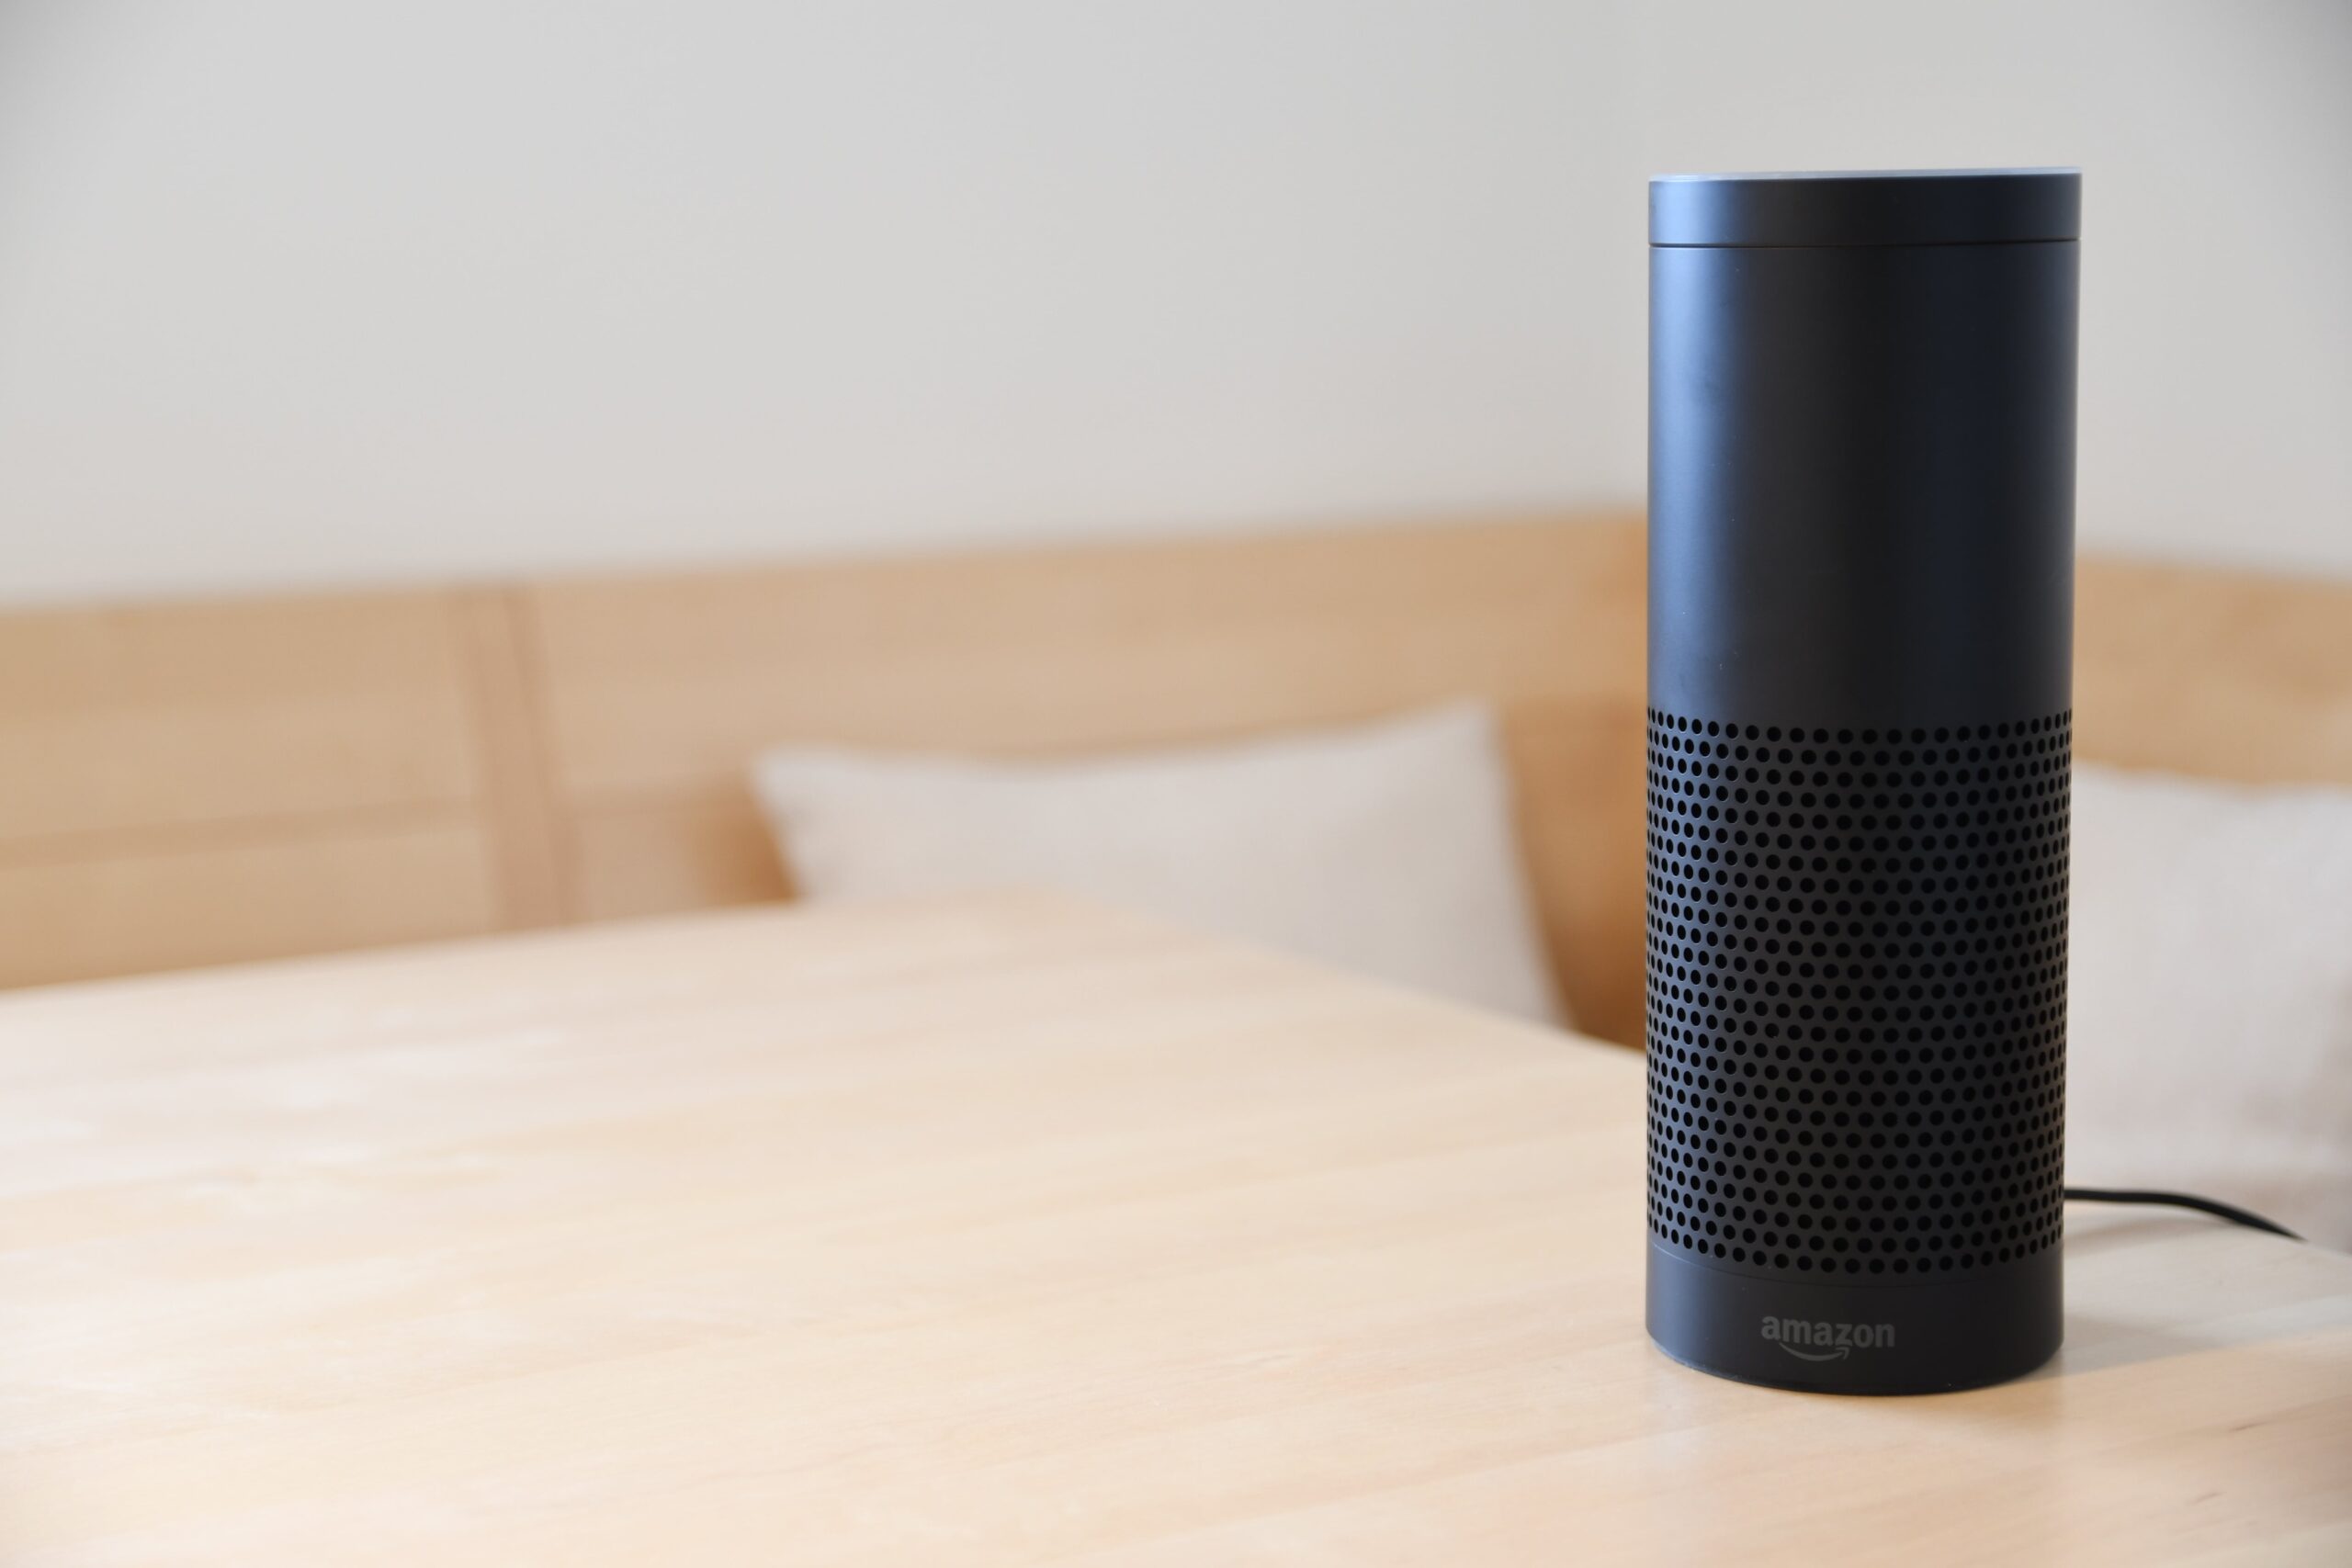 An Amazon Echo smart home device on a wood surface.